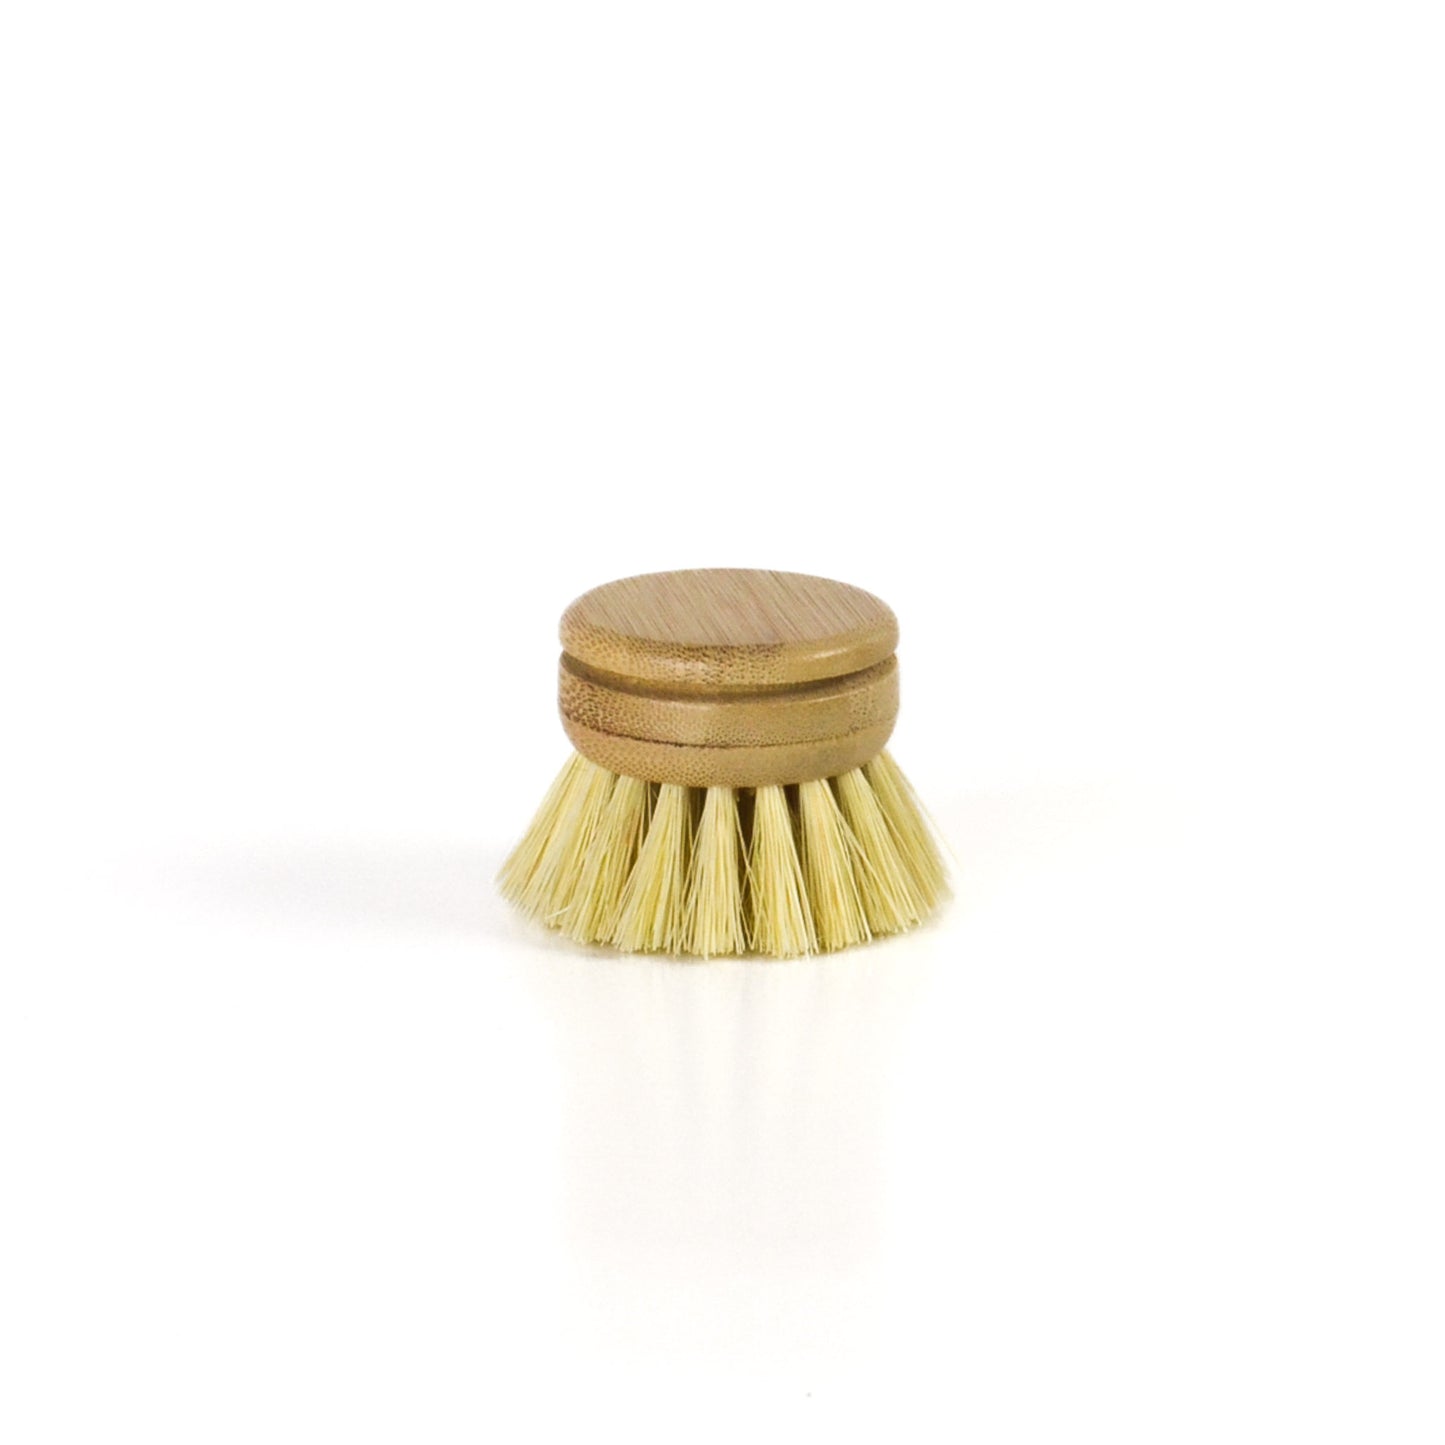 Plastic Free Compostable Sisal and bamboo dish brush replacement head